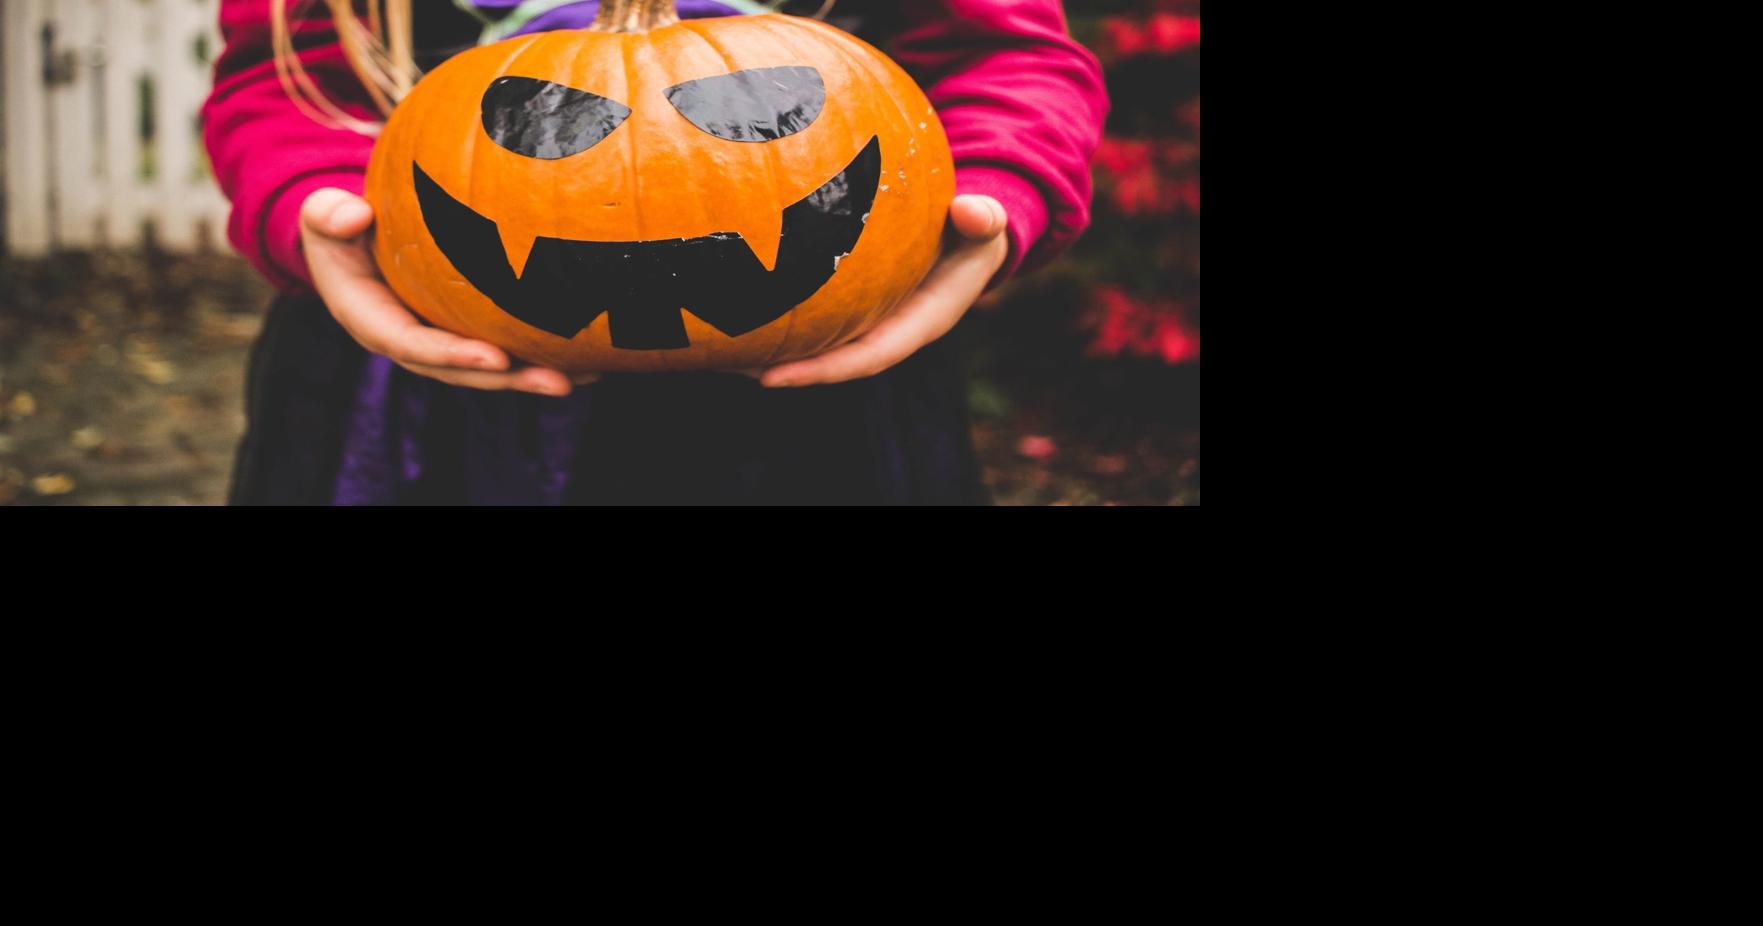 Trickortreat hours announced for BloomingtonNormal